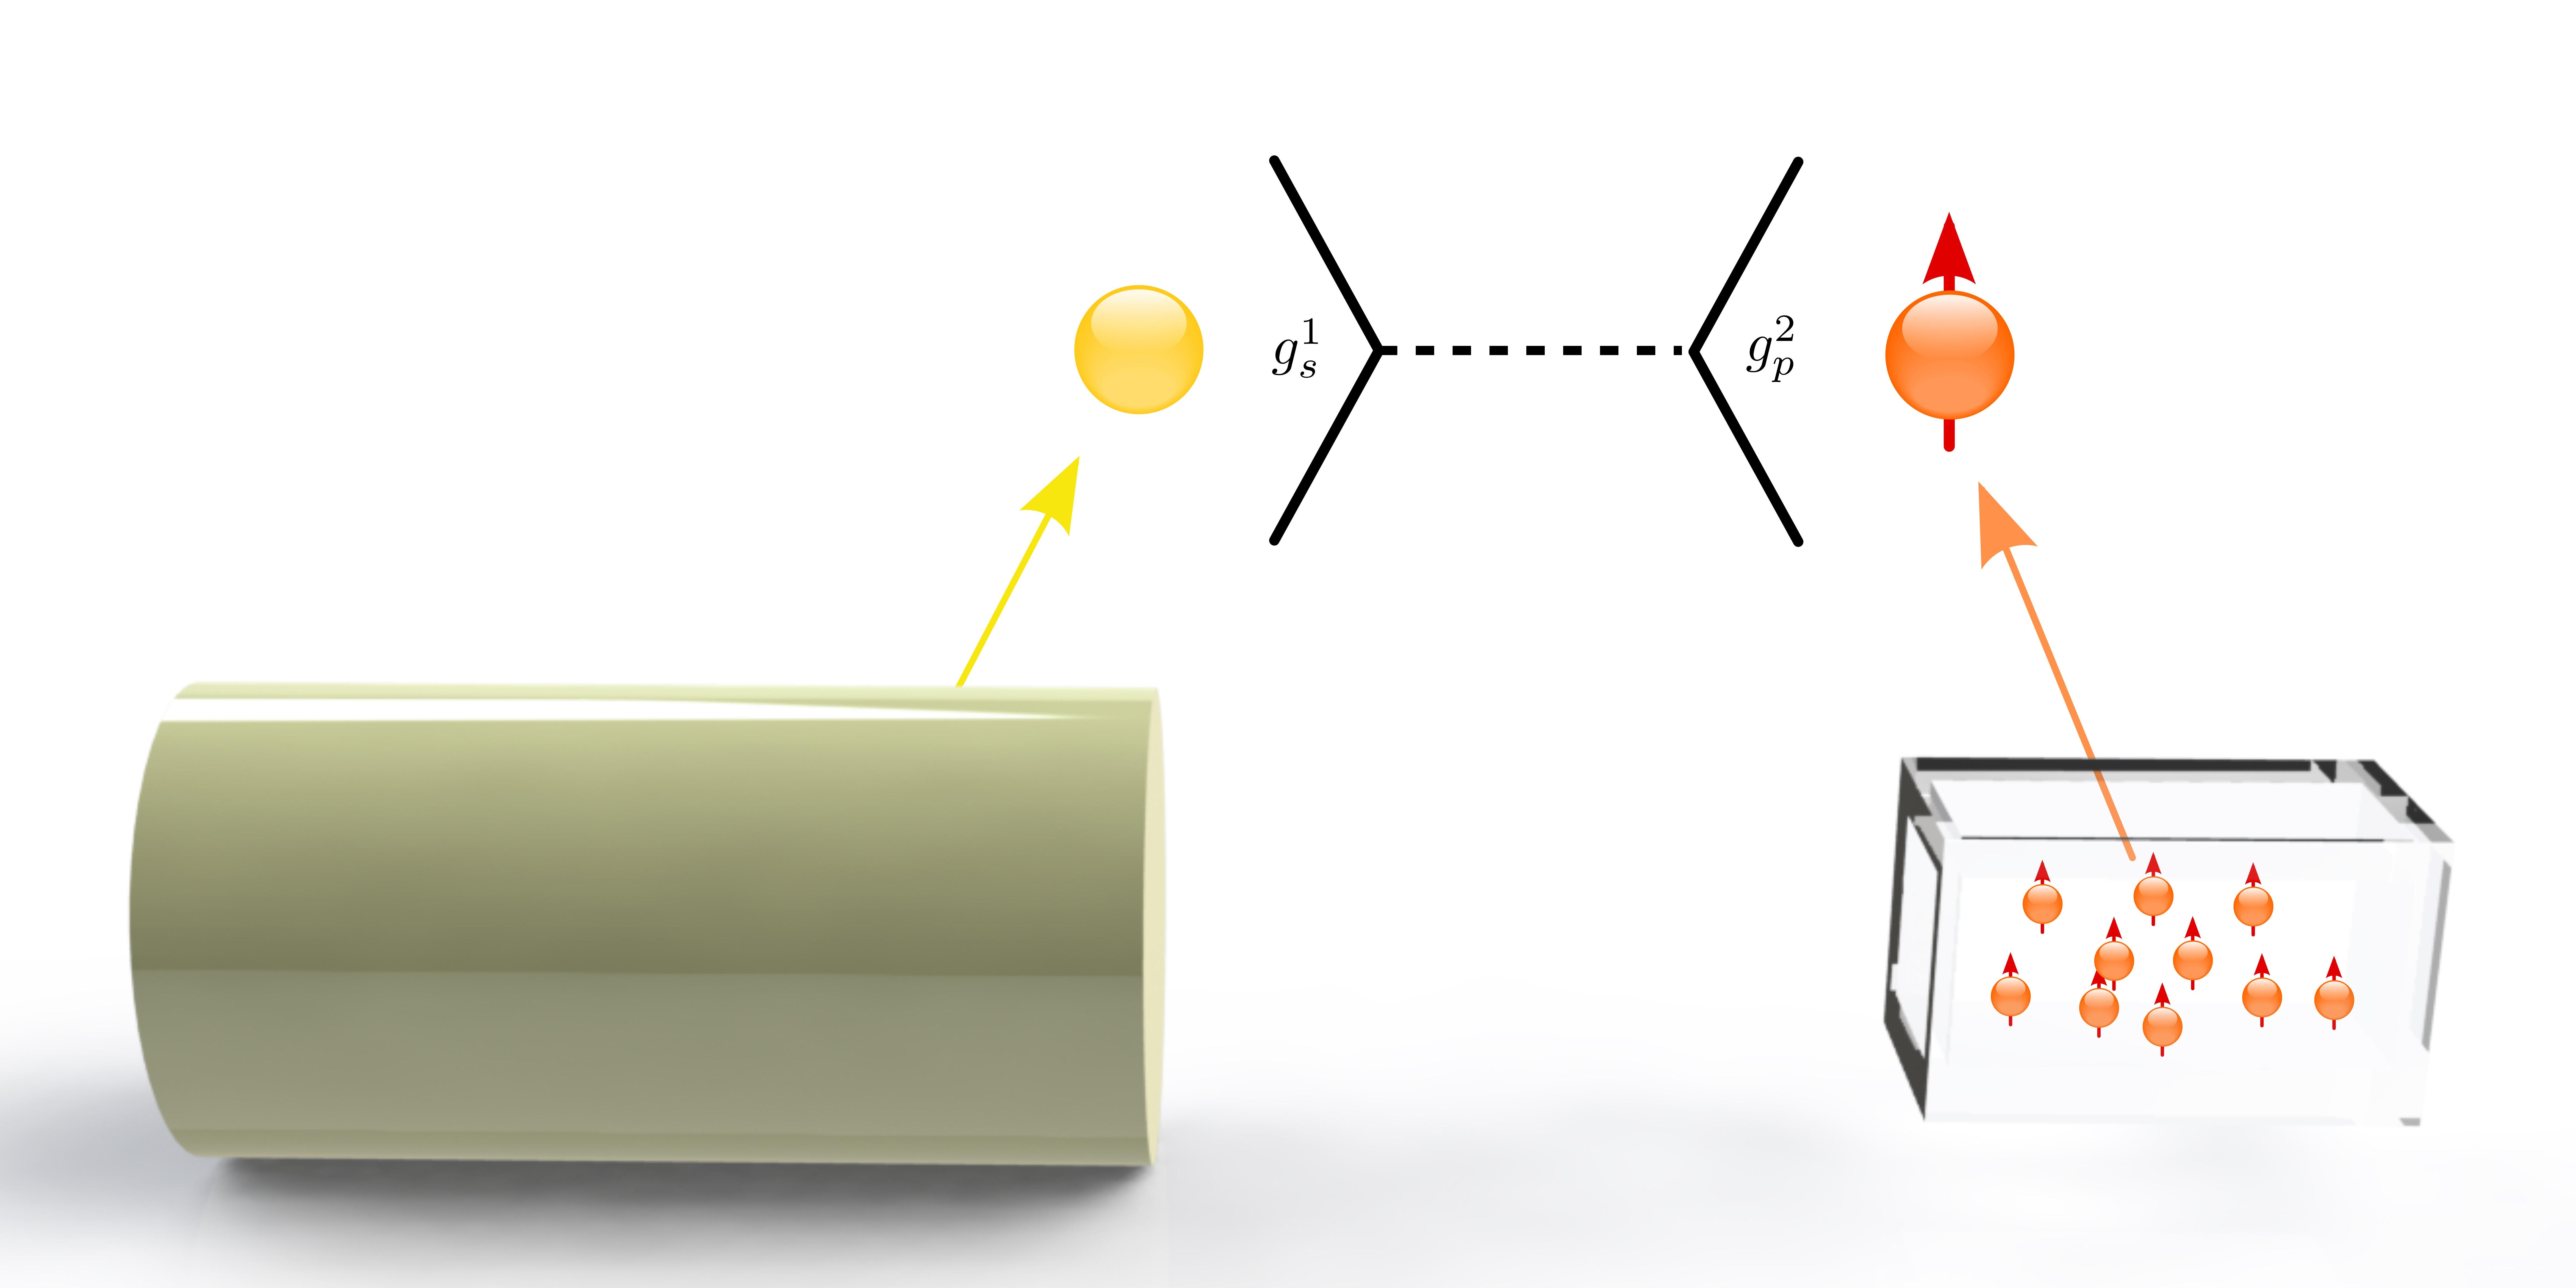 Schematic diagram of the monopole-dipole interaction between nucleons (left) and polarized xenon atoms (right), picture from University of Science and Technology of China